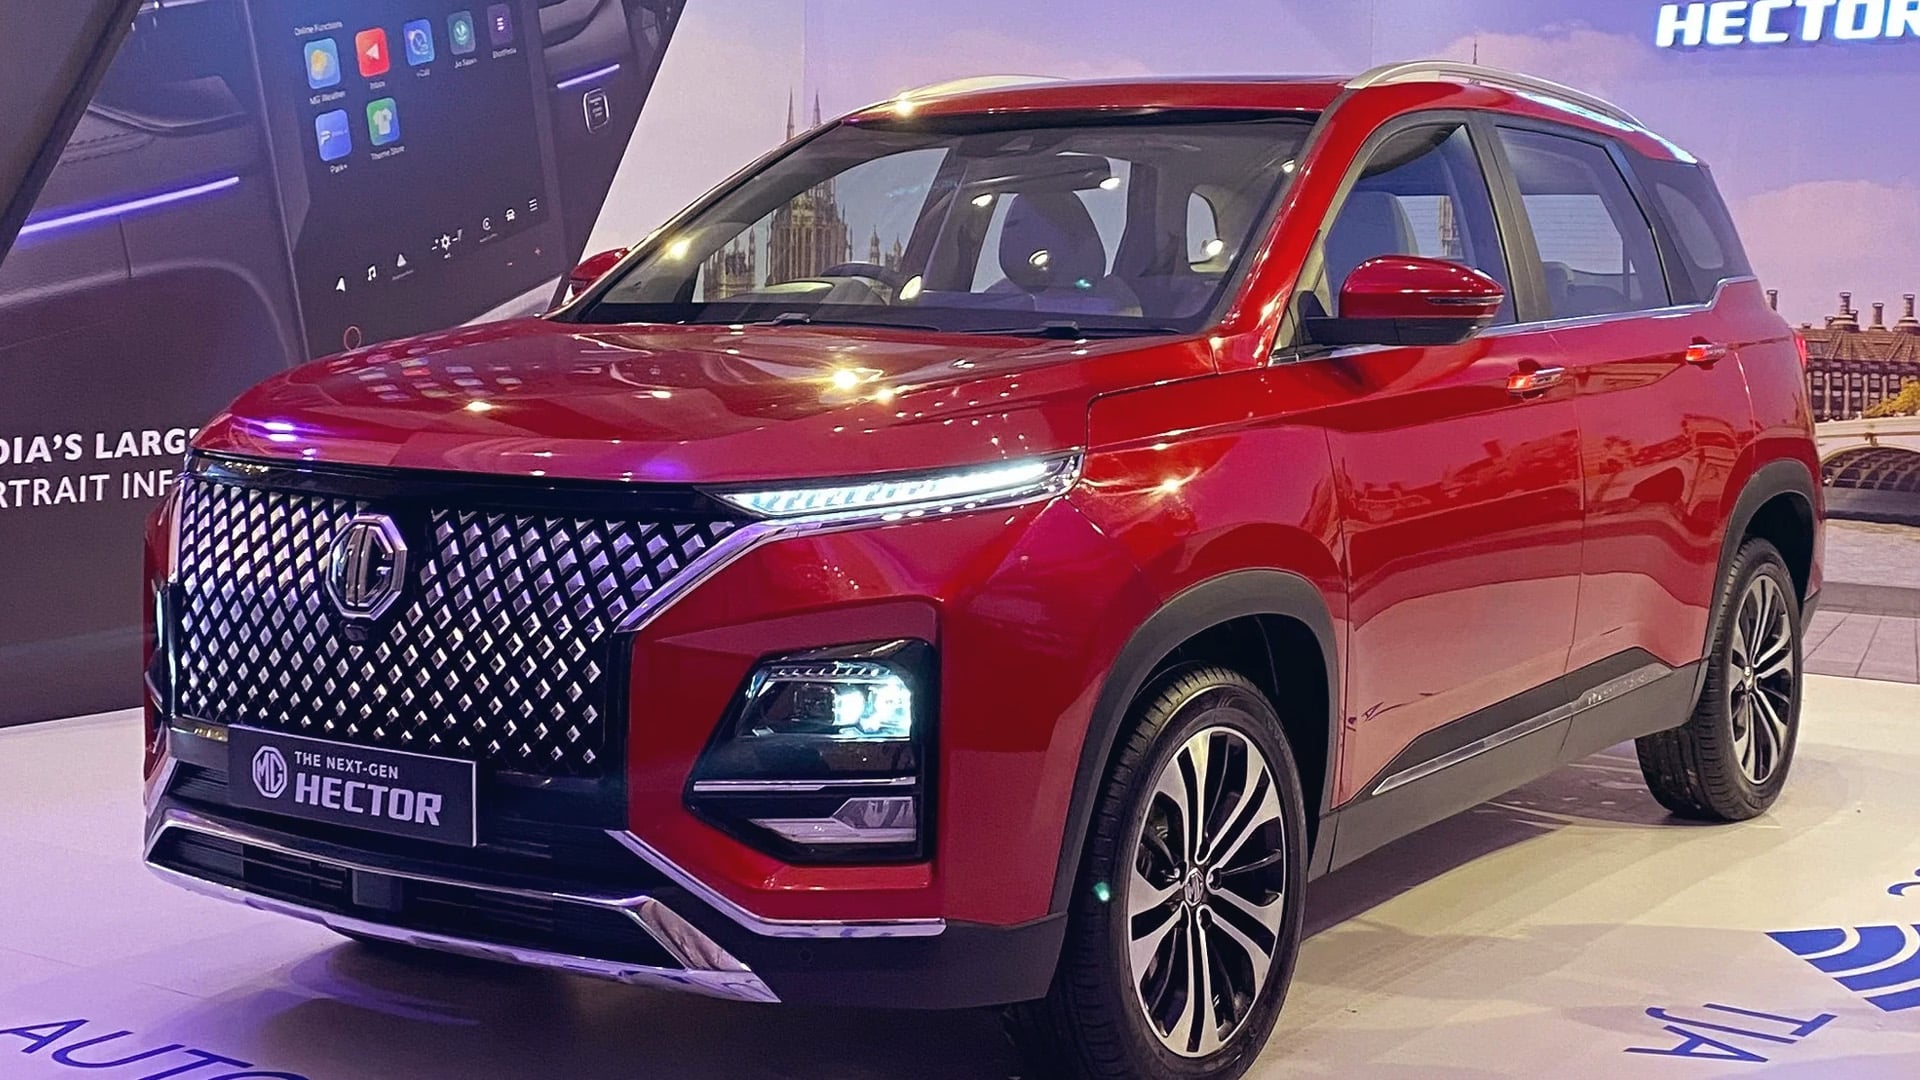 Auto Expo 2023: MG Motor India announces next-gen Hector price starting at Rs 14.72 lakh